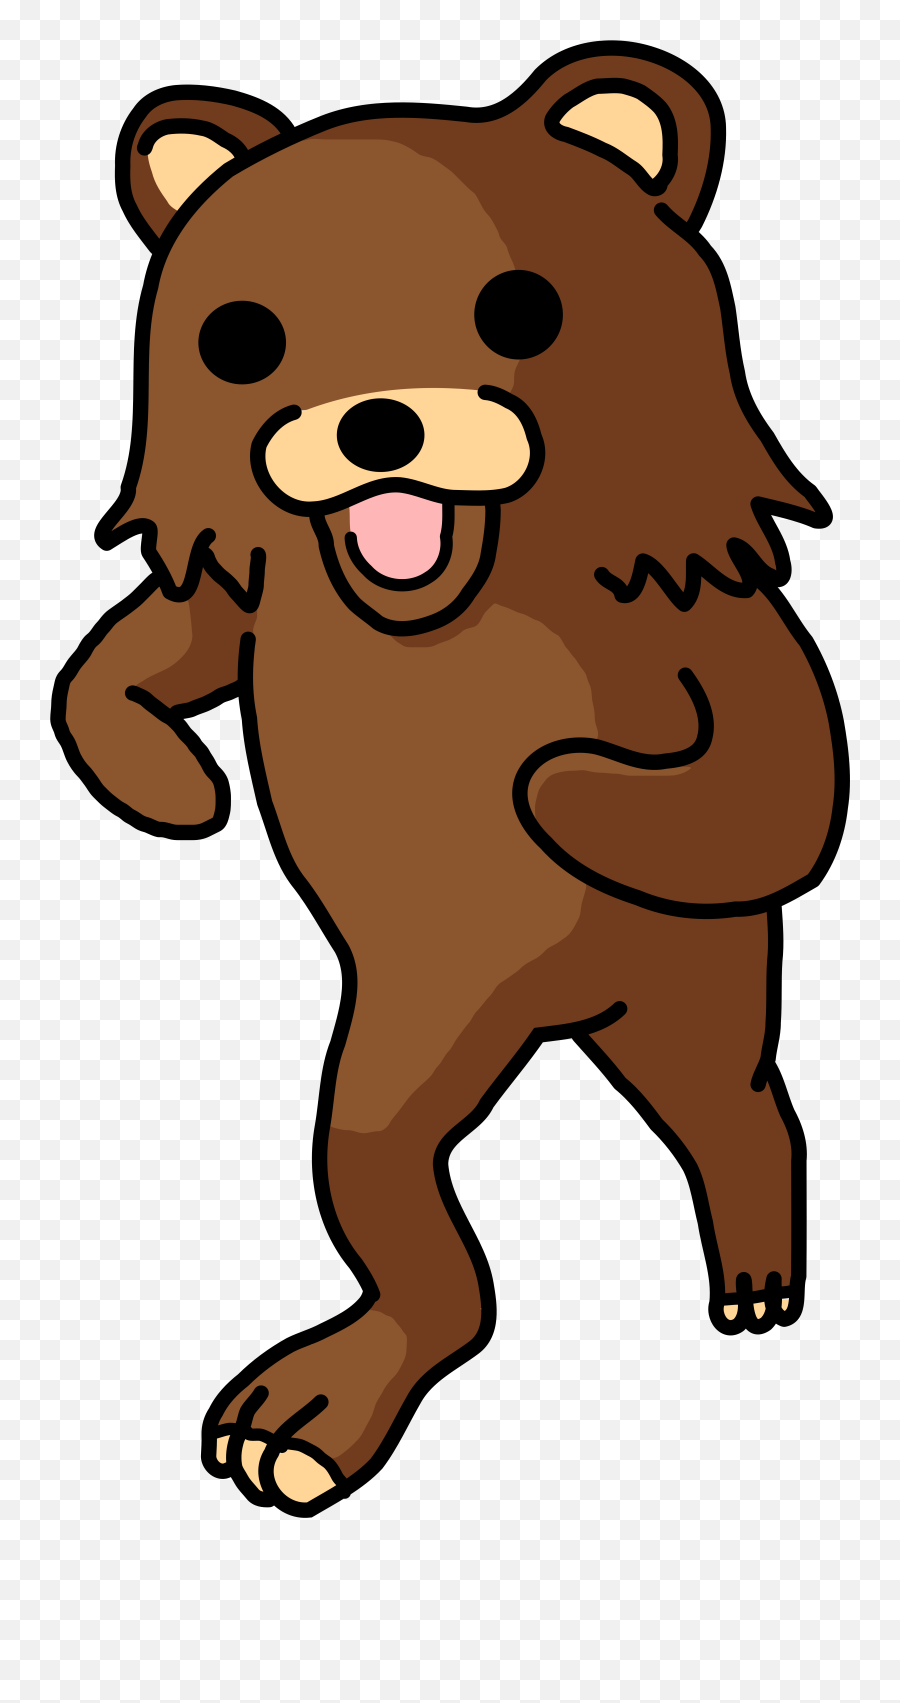 Clipart Chicago Bears Mascot - Chicago Bears And Mascots Emoji,Chicago Bears Emoji